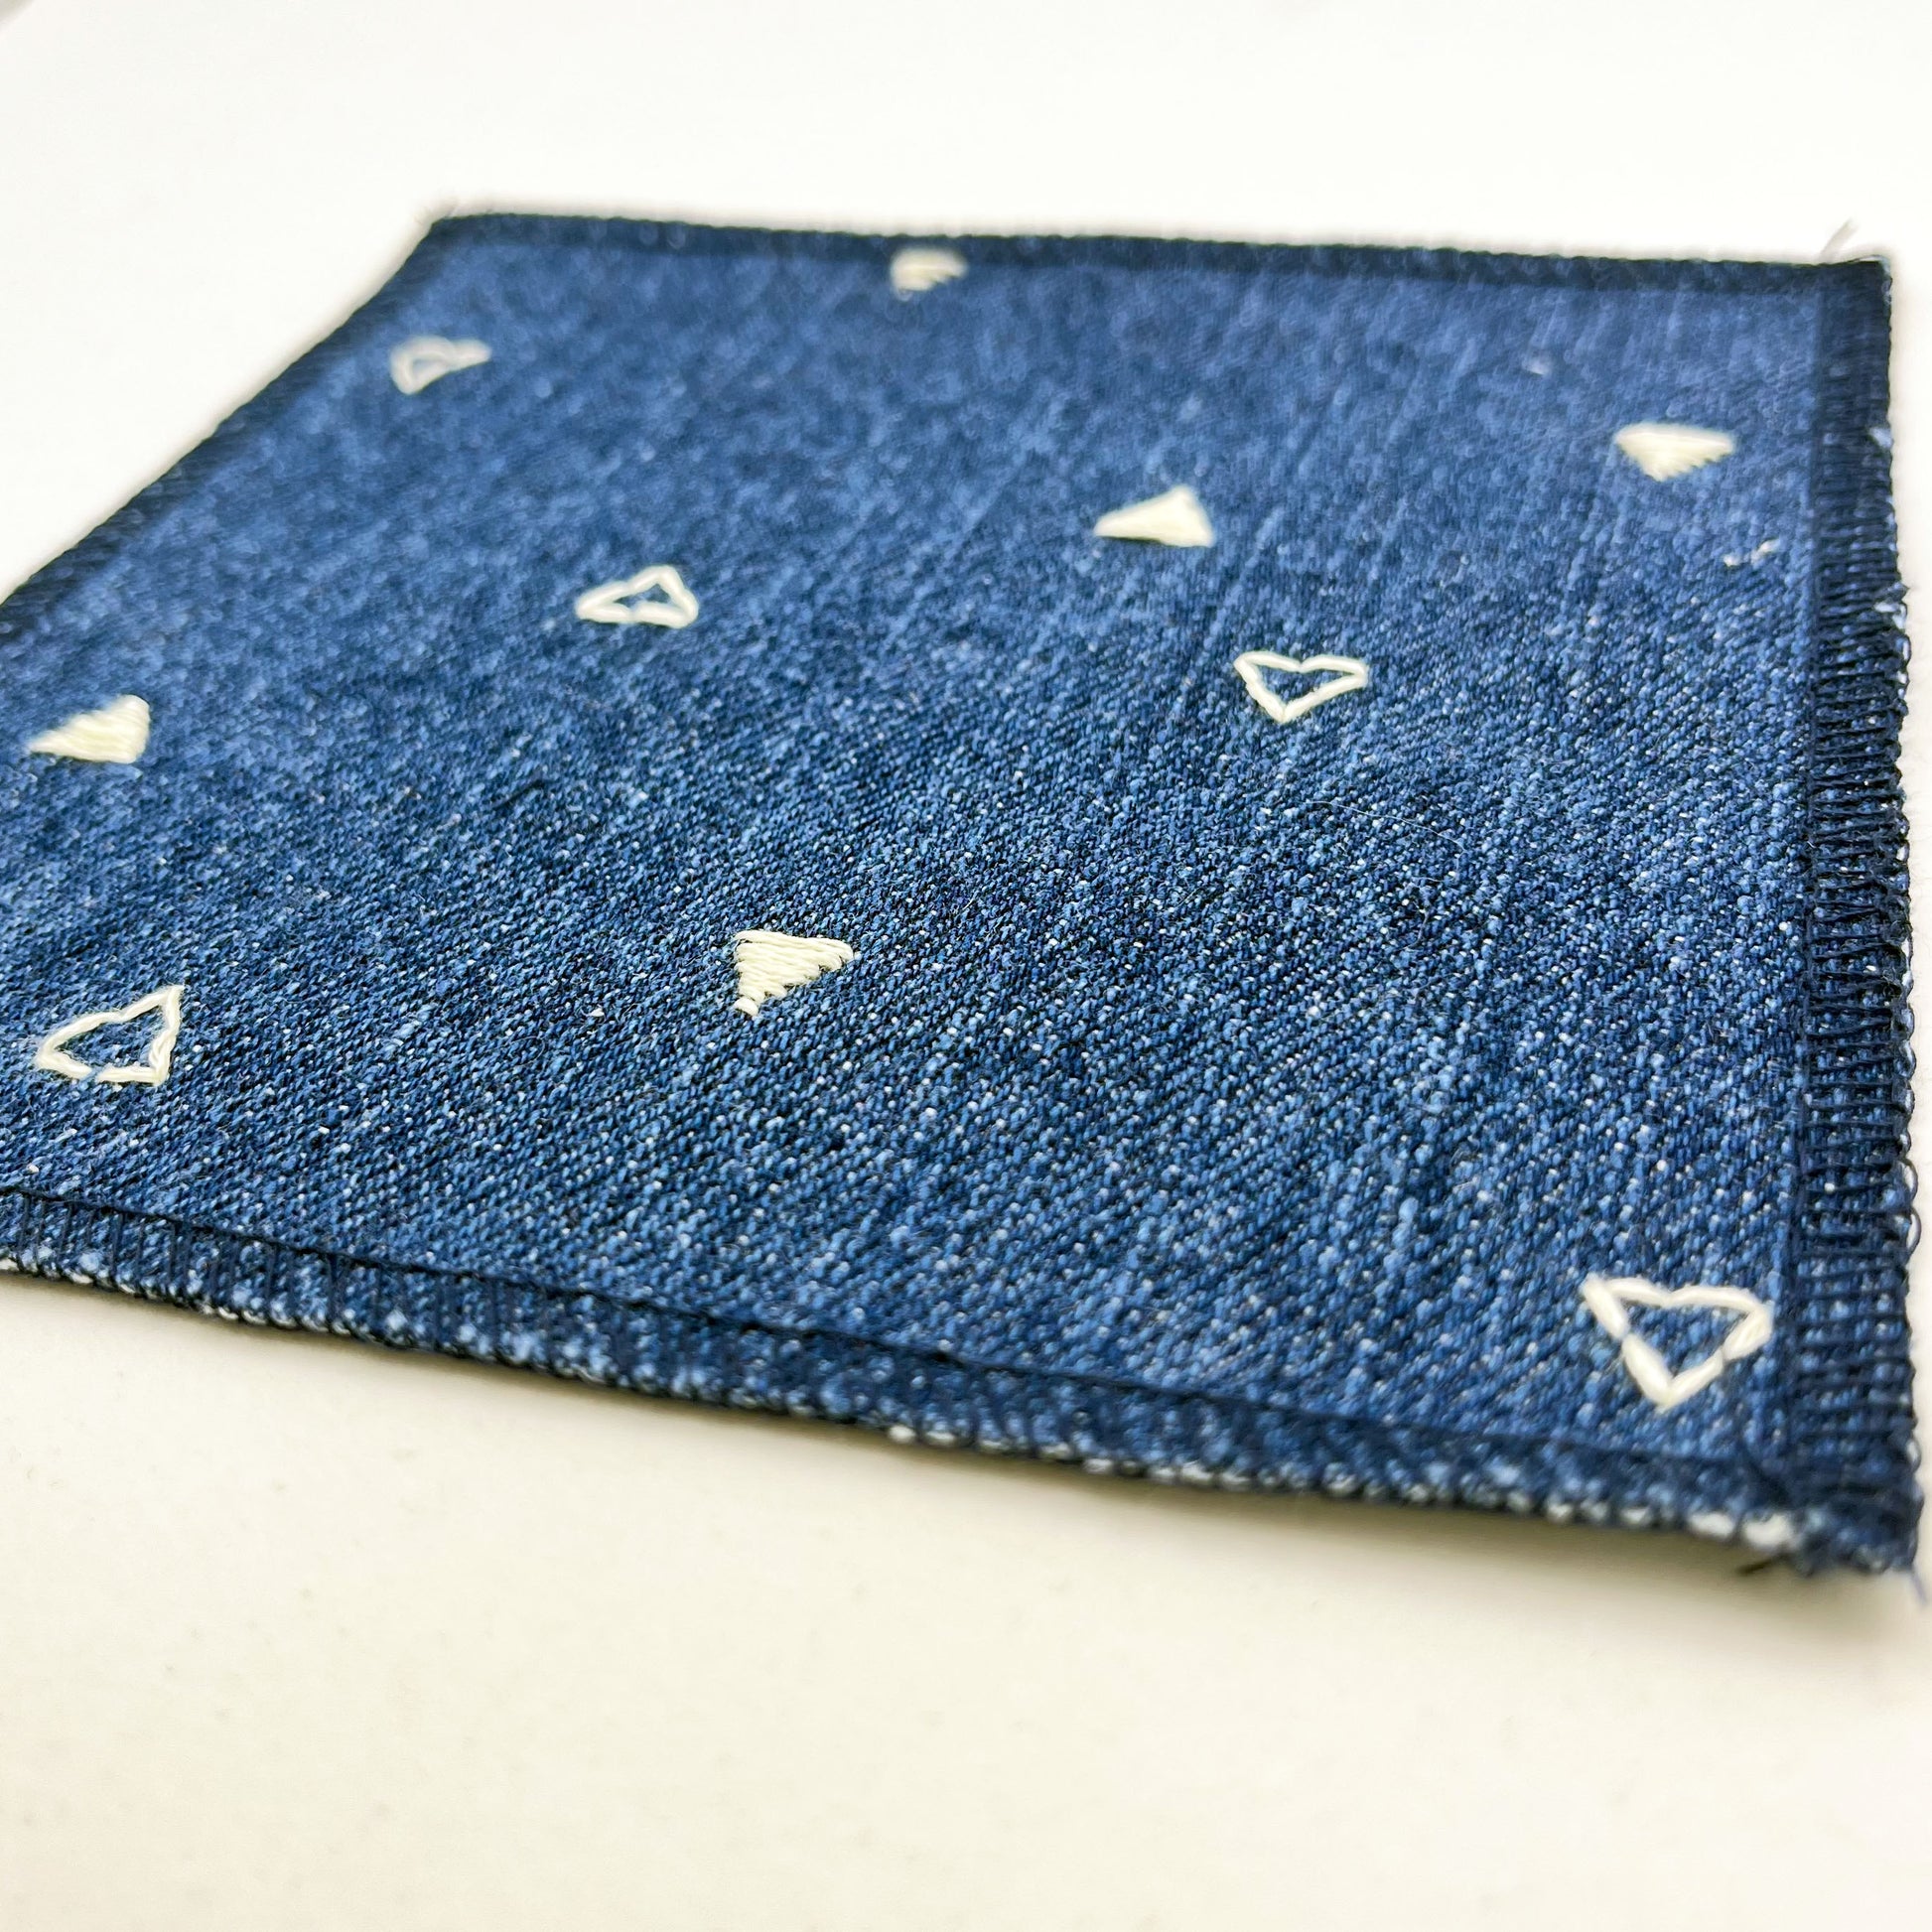 an angled close up view of a square patch made out of denim, handstitched with scattered ivory triangles, some as outlines some with a line fill, with overlocked edges, on a white background